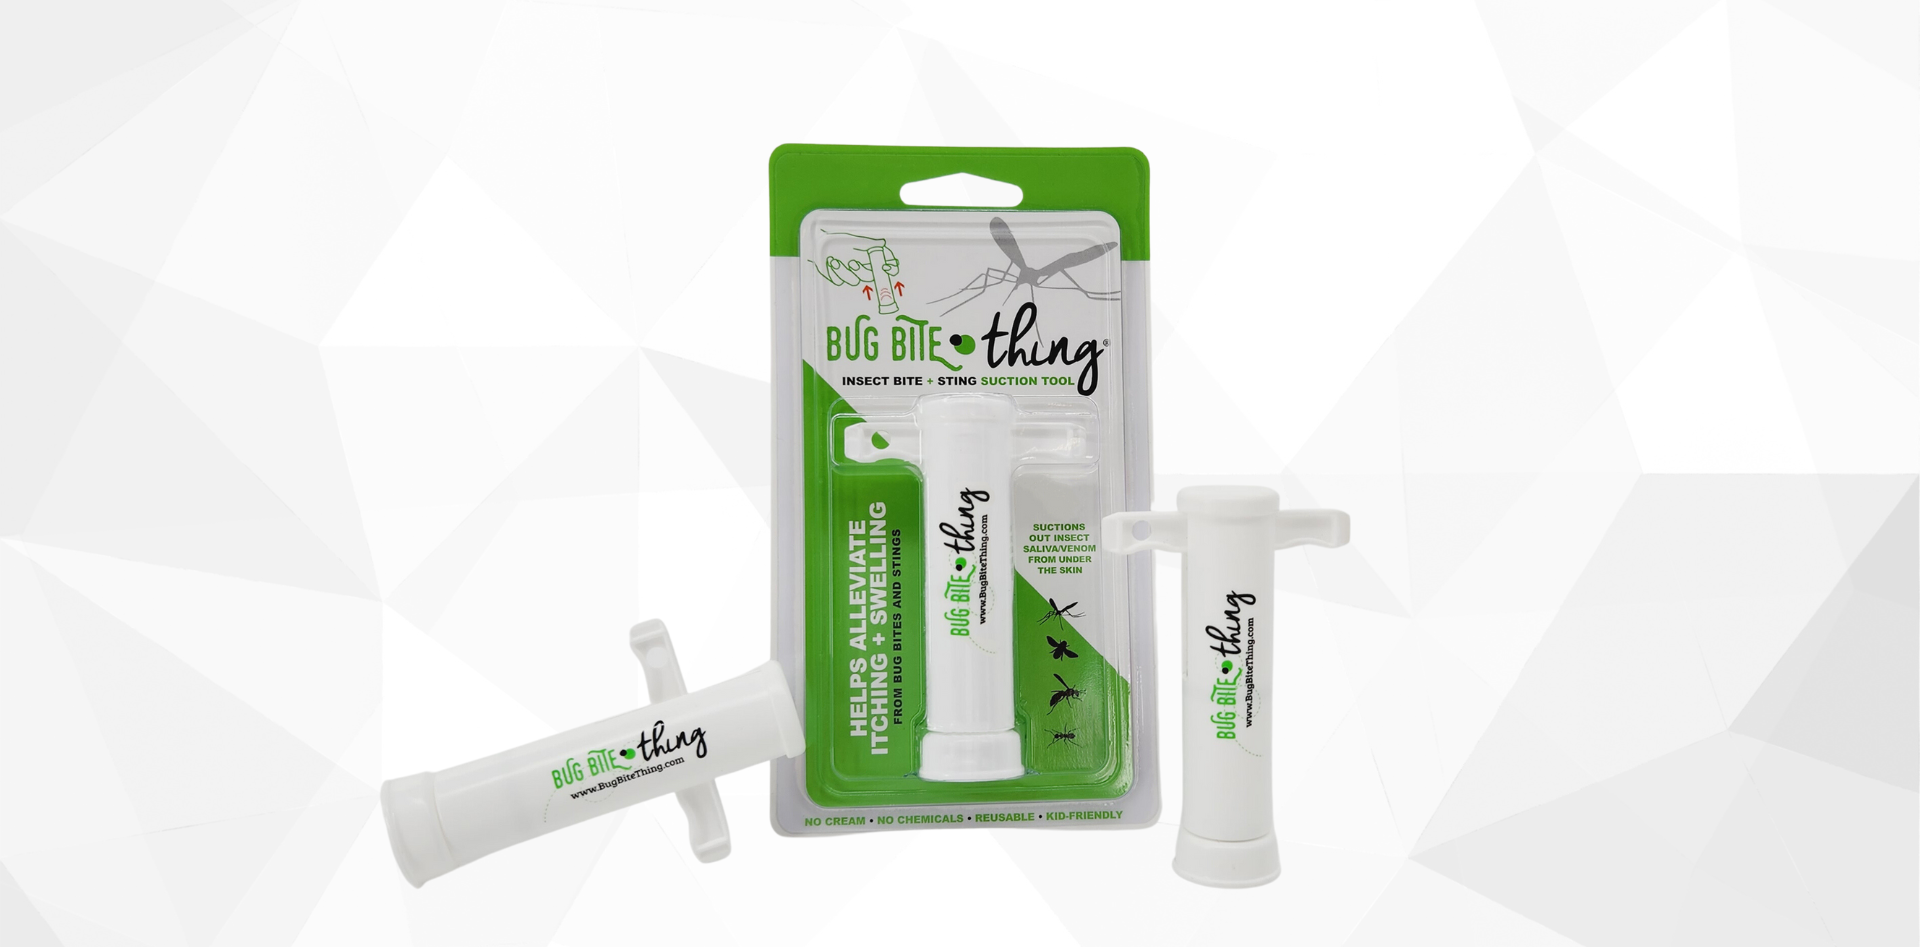 Paratore Enterprises, Inc is proud to partner with Bug Bite Thing, maker of  the chemical-free insect bite relief suction tool. – Paratore Enterprises